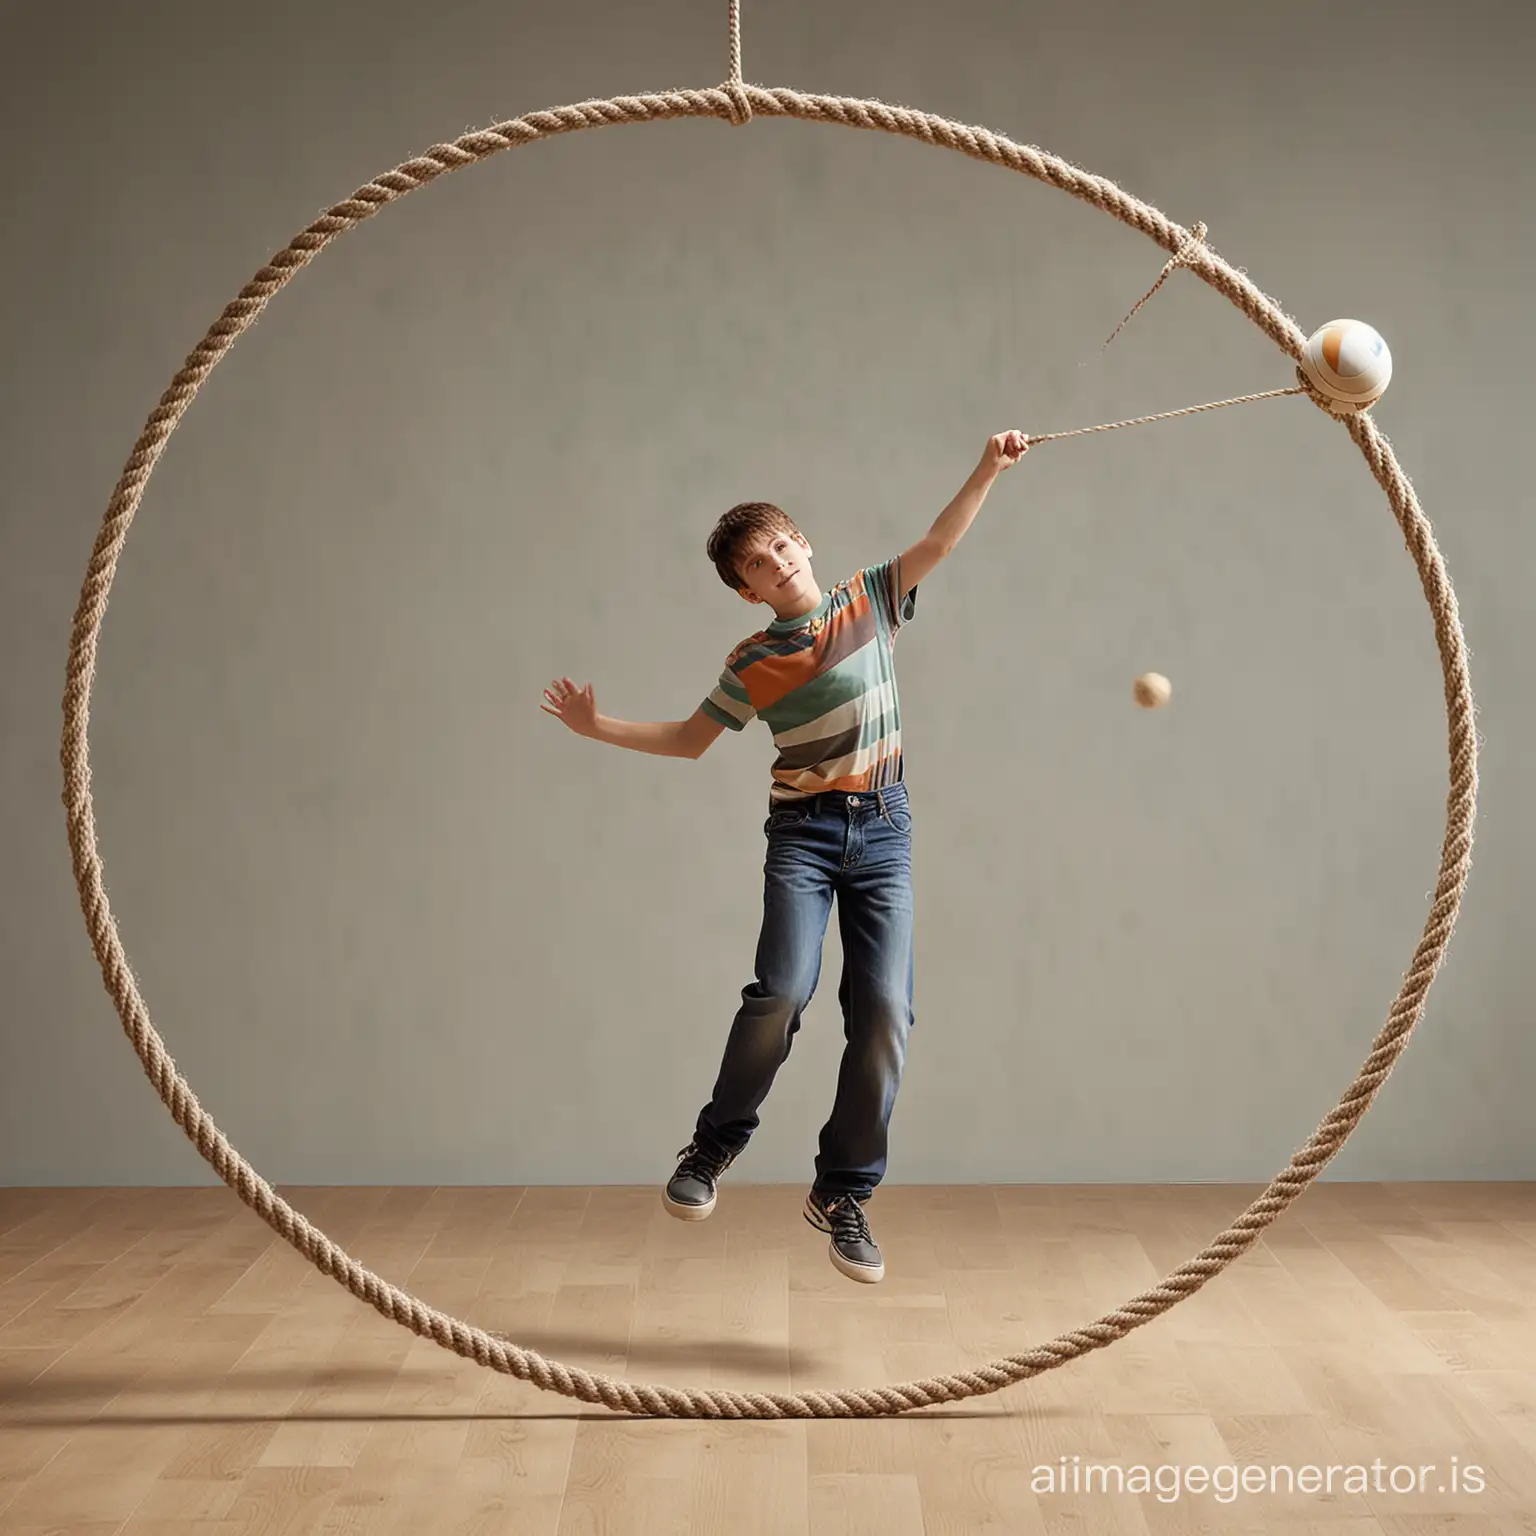 Generate an image depicting a boy swinging a ball in circular motion using a rope. The boy is standing with his arm extended, holding one end of the rope, while the other end is attached to the ball. The ball is shown at the end of the rope, moving in a circular path around the boy's hand. The scene should convey the dynamics of circular motion, with the ball appearing blurred to indicate its motion.